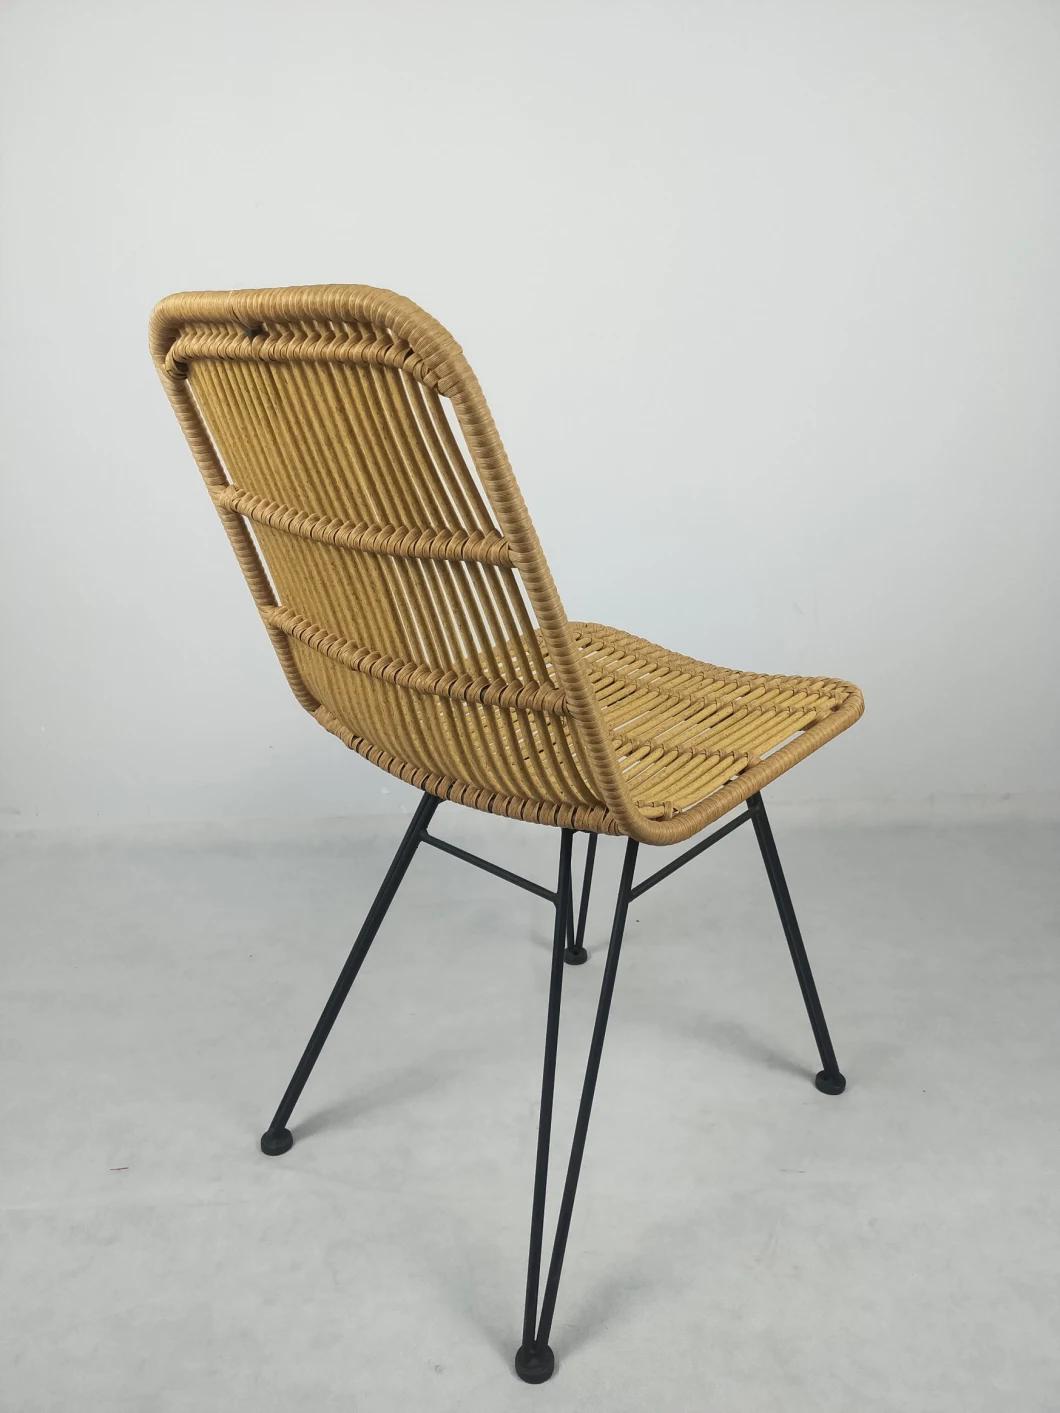 Factory Price Non-Wood Iron Outdoor Rattan Chair Wicker Tablet Stackable Restaurant Chair